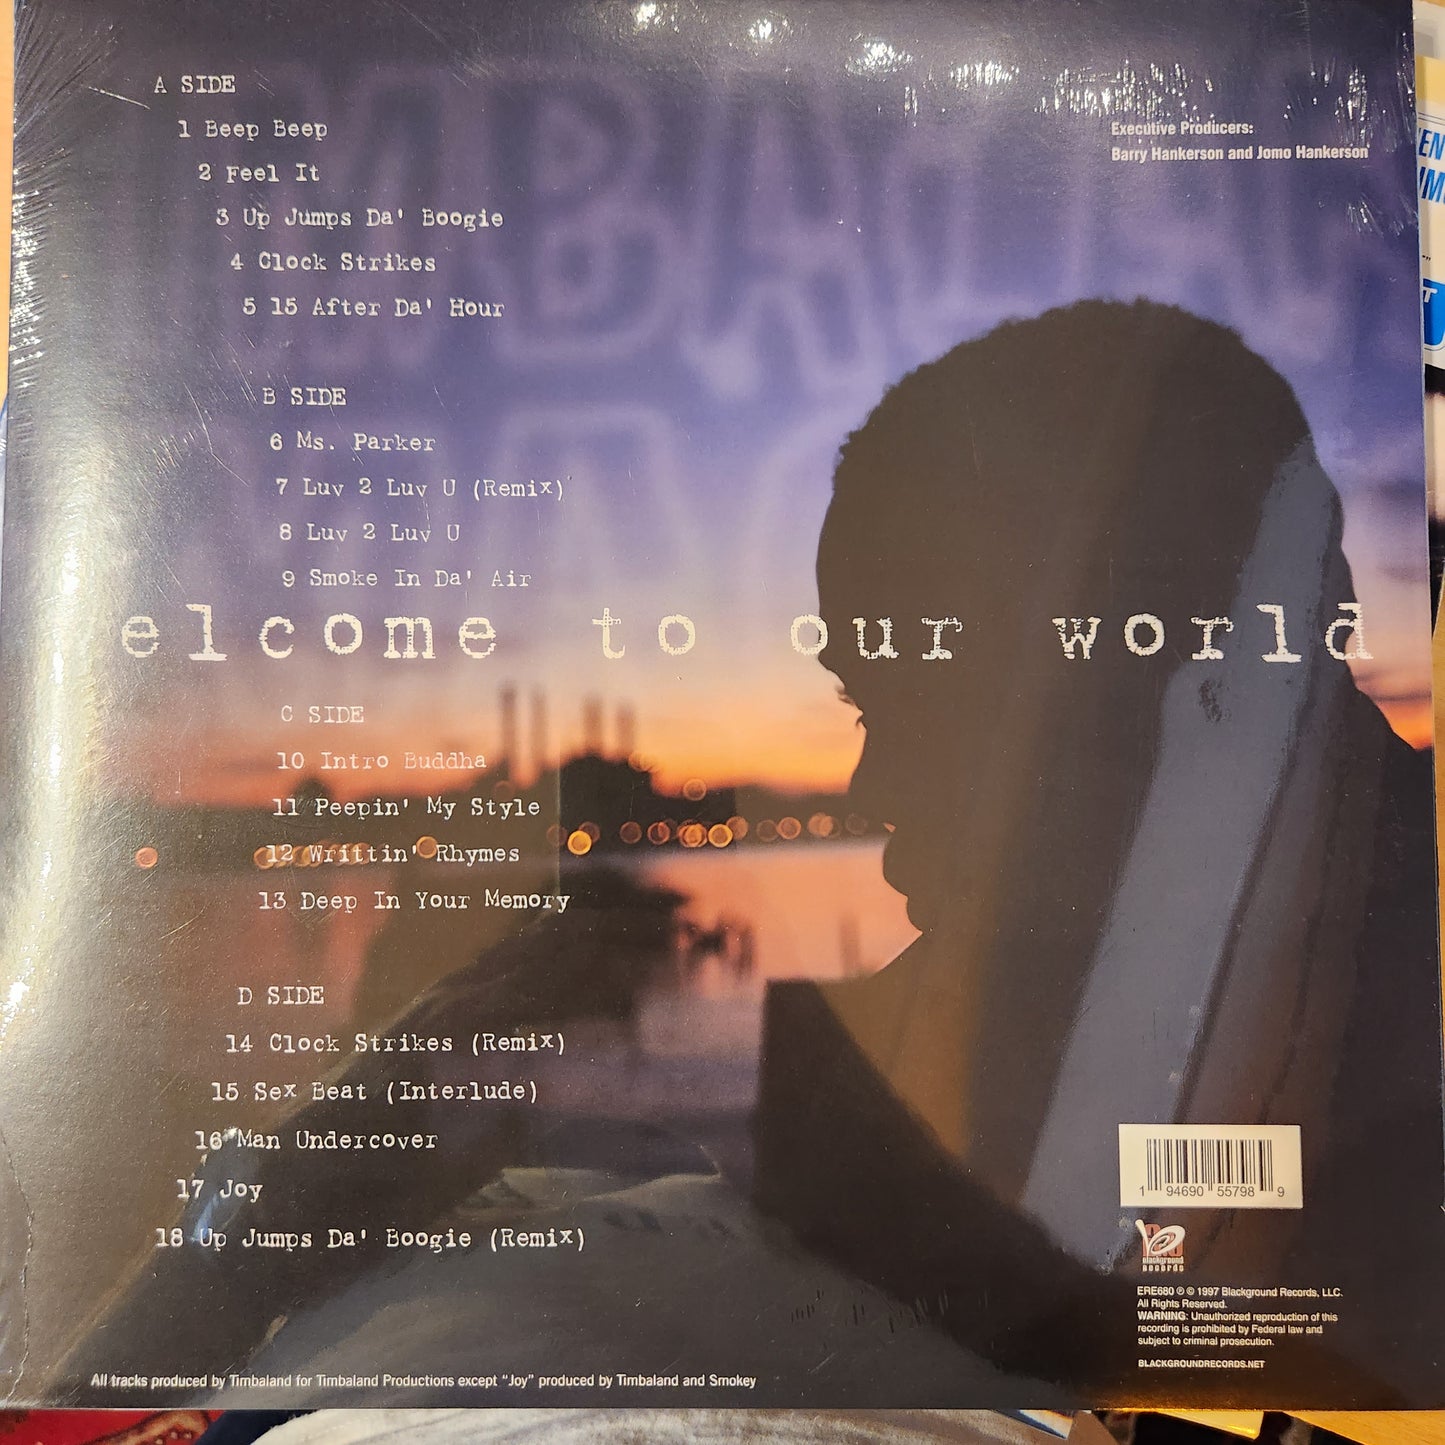 Timbaland & Magoo - Welcome to our World - Vinyl Lp